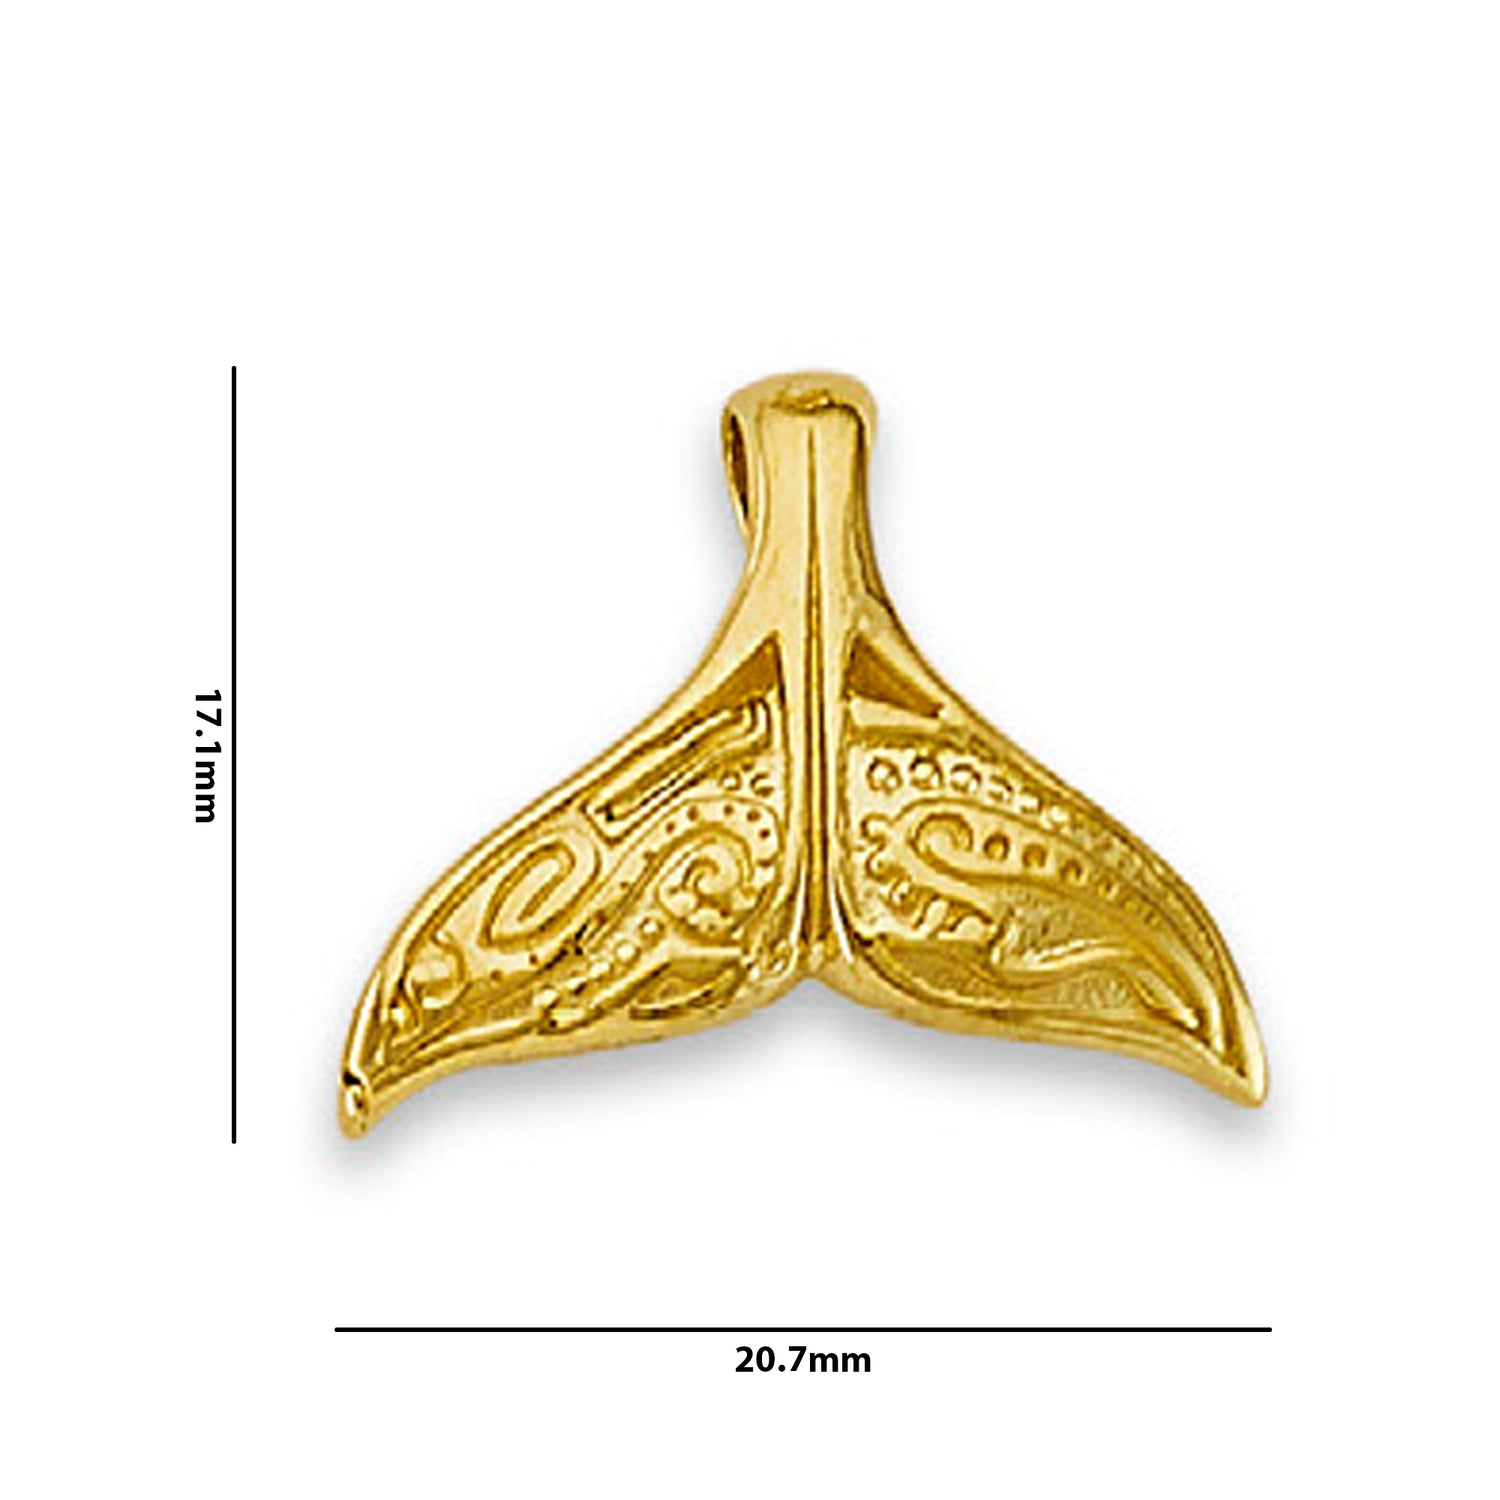 Yellow Gold Whale Tail Charm Pendant with Measurement